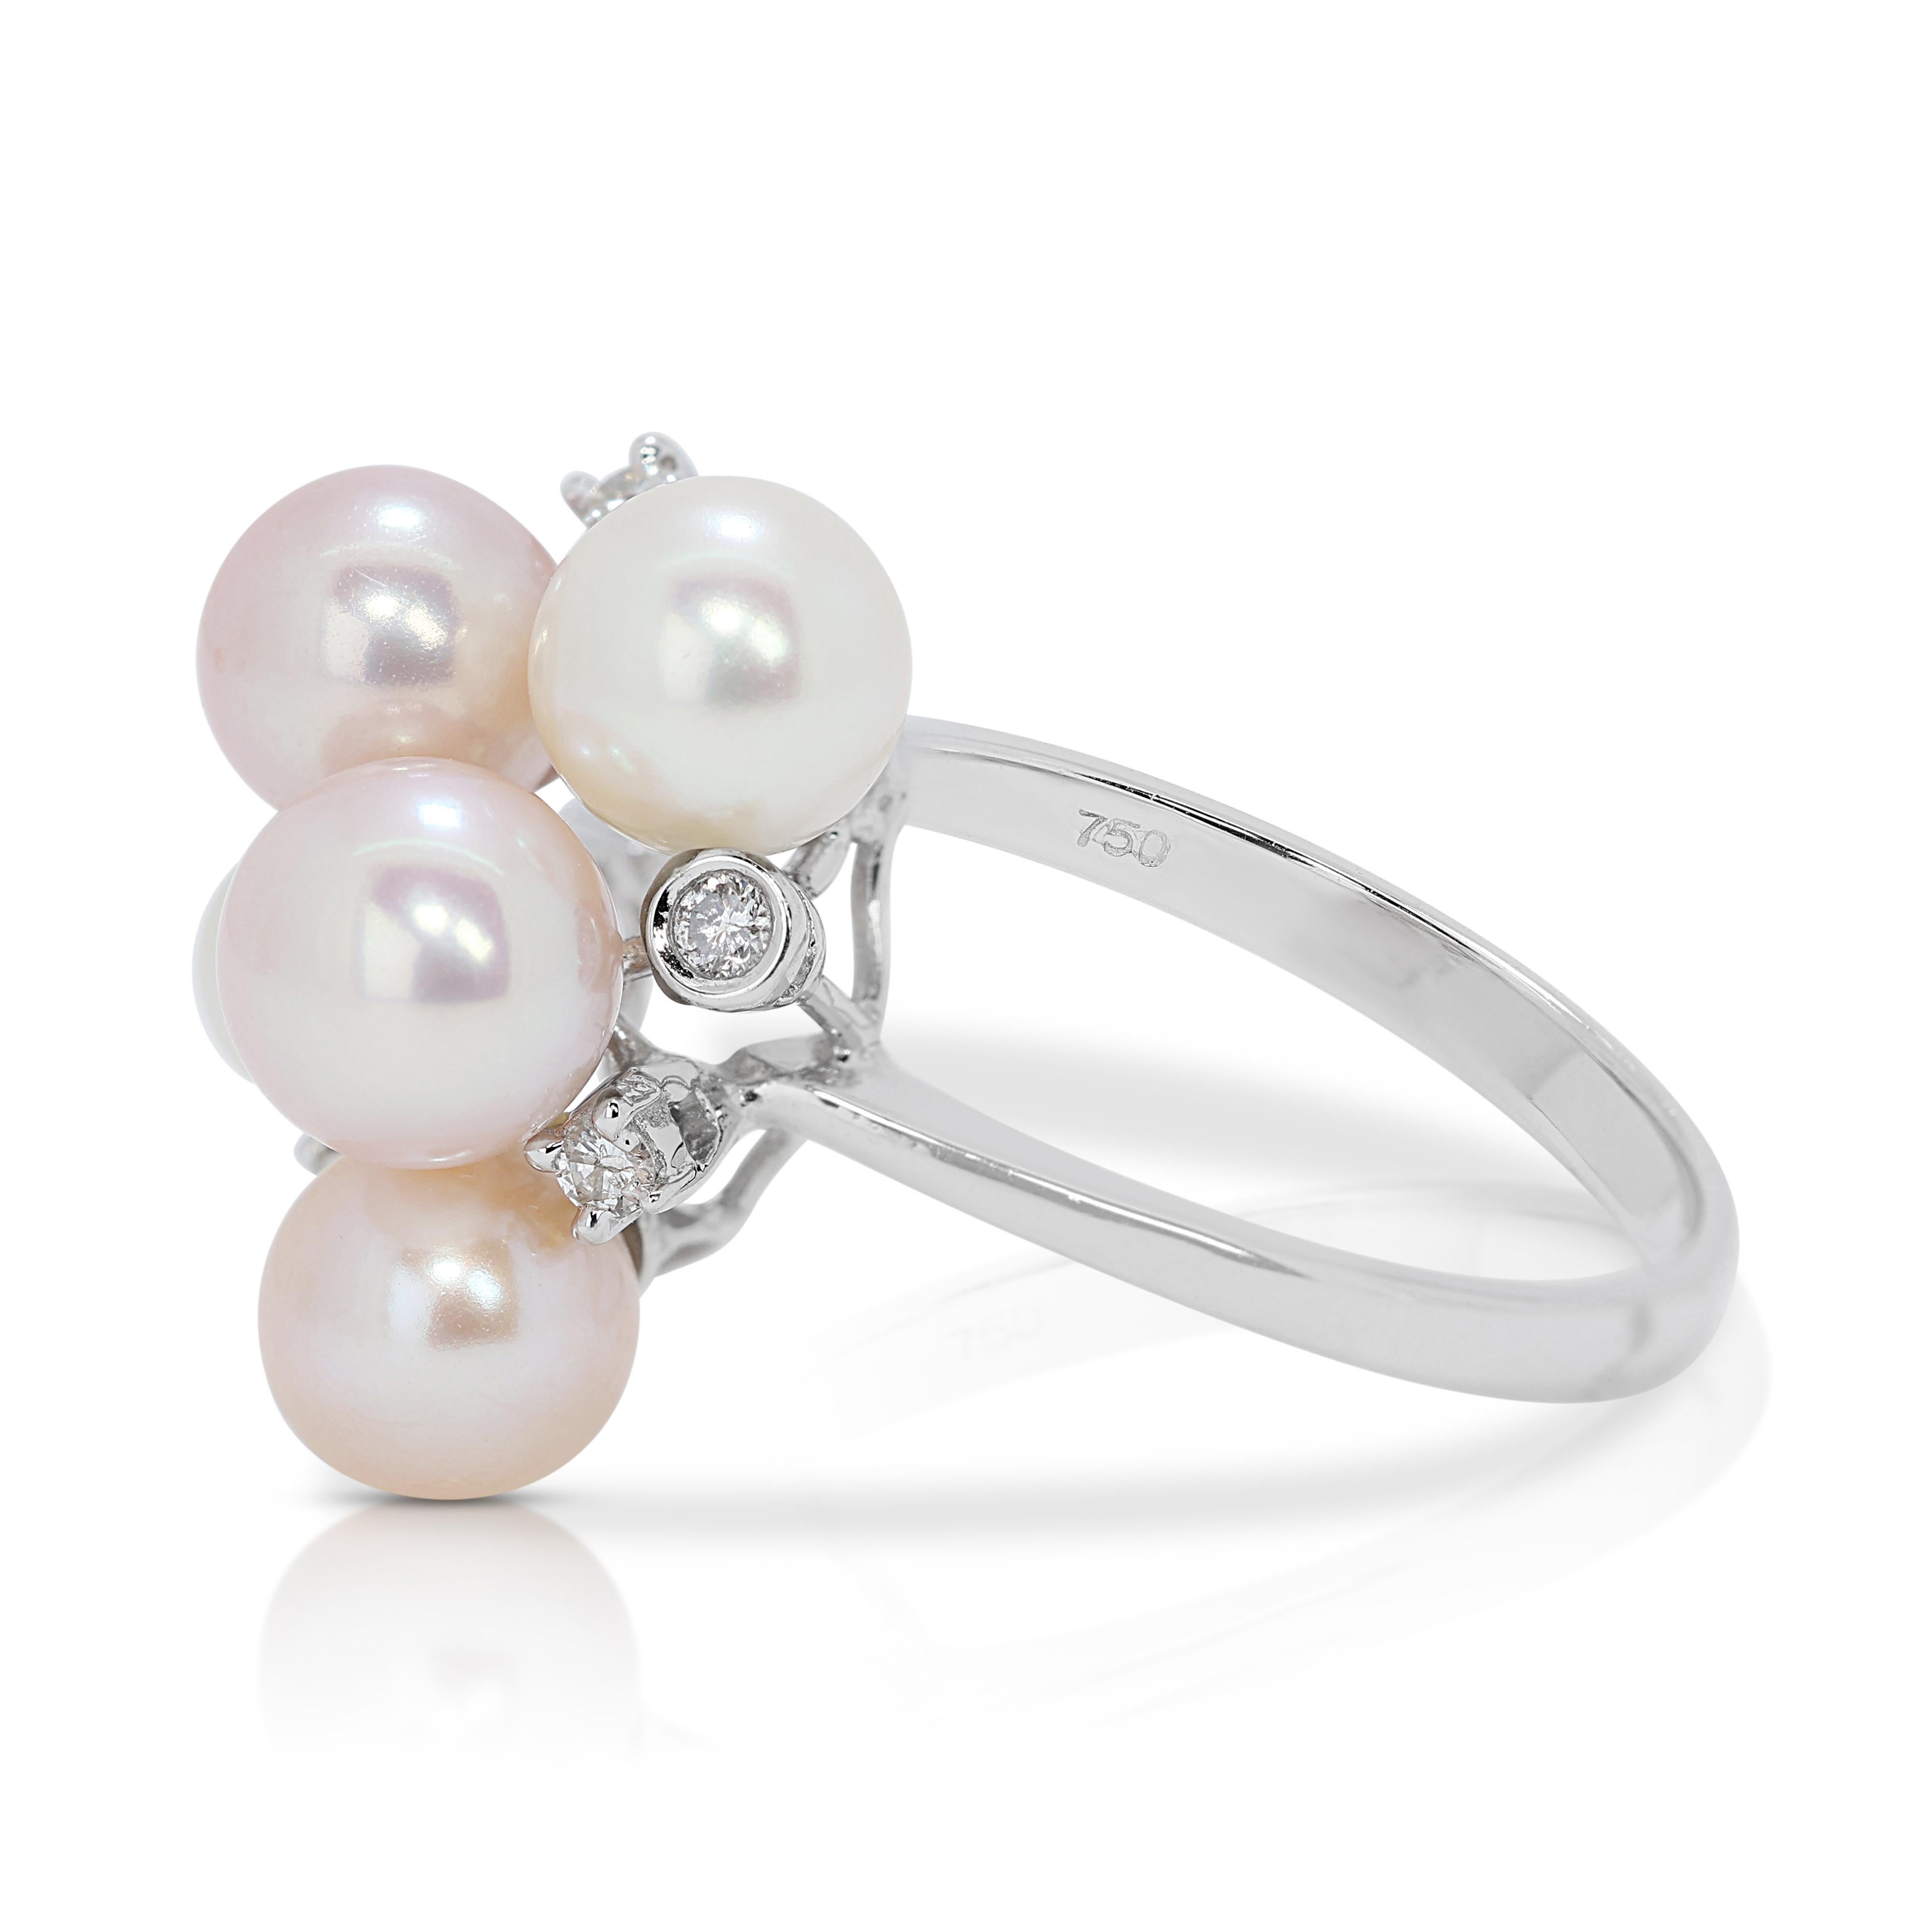 Unique Round Pearl Ring with Diamonds in 18K White Gold In Excellent Condition For Sale In רמת גן, IL